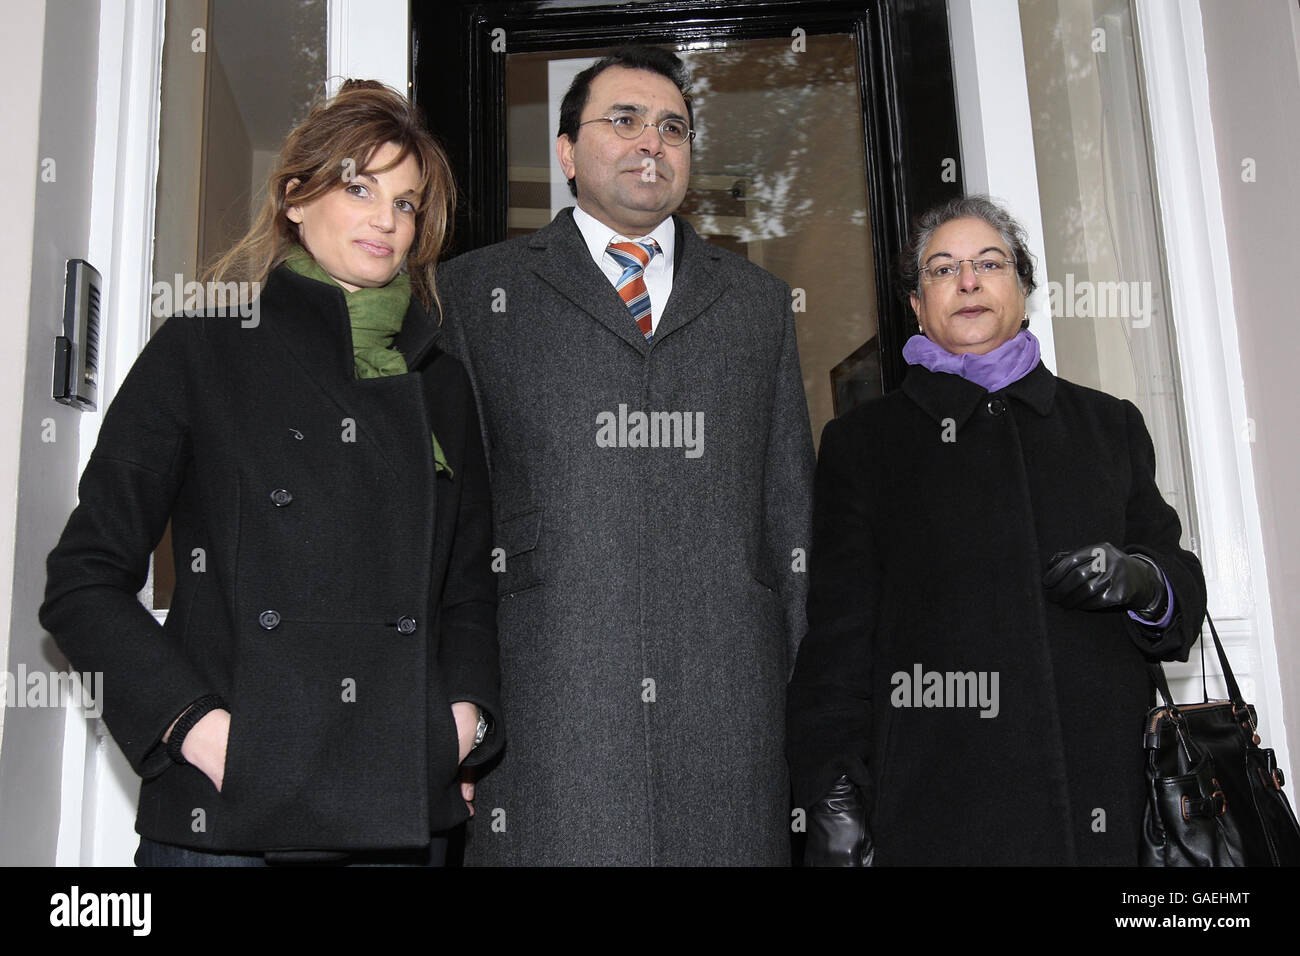 Jemima Khan (left), former wife of jailed Pakistani politician Imran Khan, with Dr Aamer Safraz (centre), who represents Pakistani academics and professionals and Pakistani Supreme Court Lawyer, Hina Jilani (right) outside the Pakistan High Commission in London, where she joined protesters calling for an end to the state of emergency and the release of all political prisoners in the country. Stock Photo